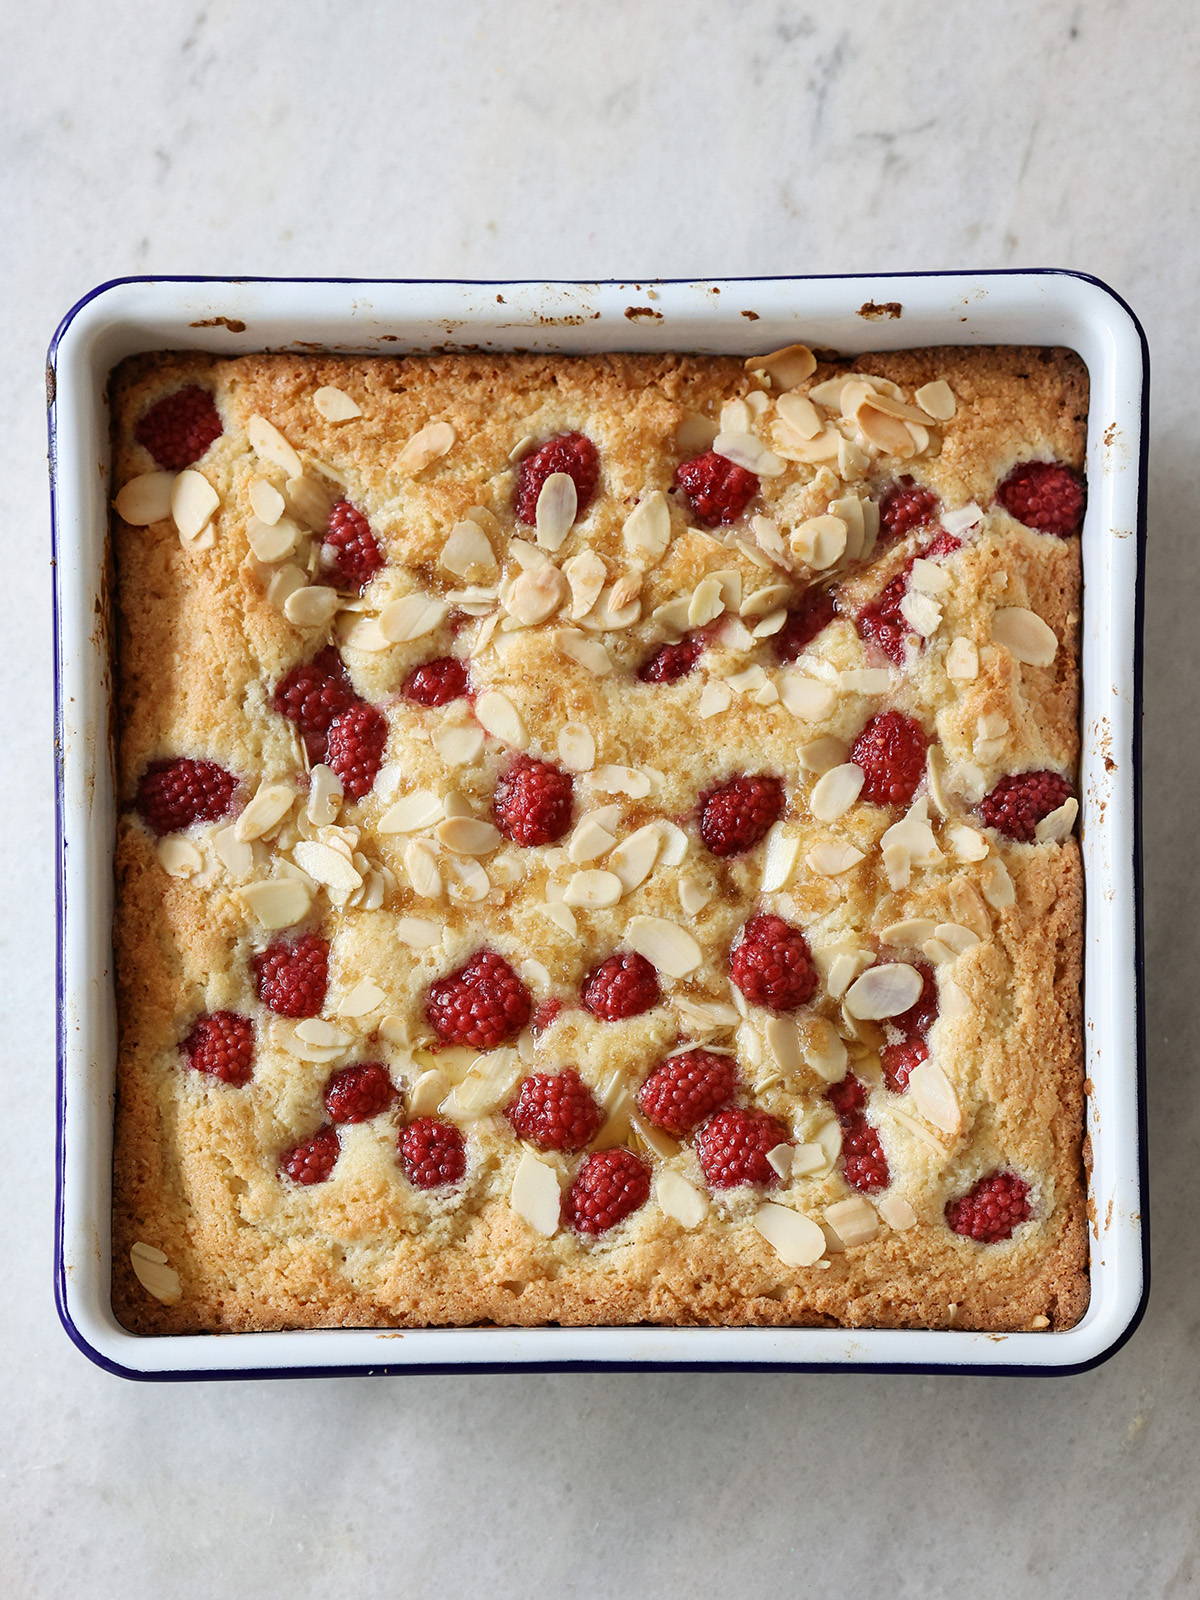 A photograph of a Raspberry Frangipane Bake in a Square bake tray.